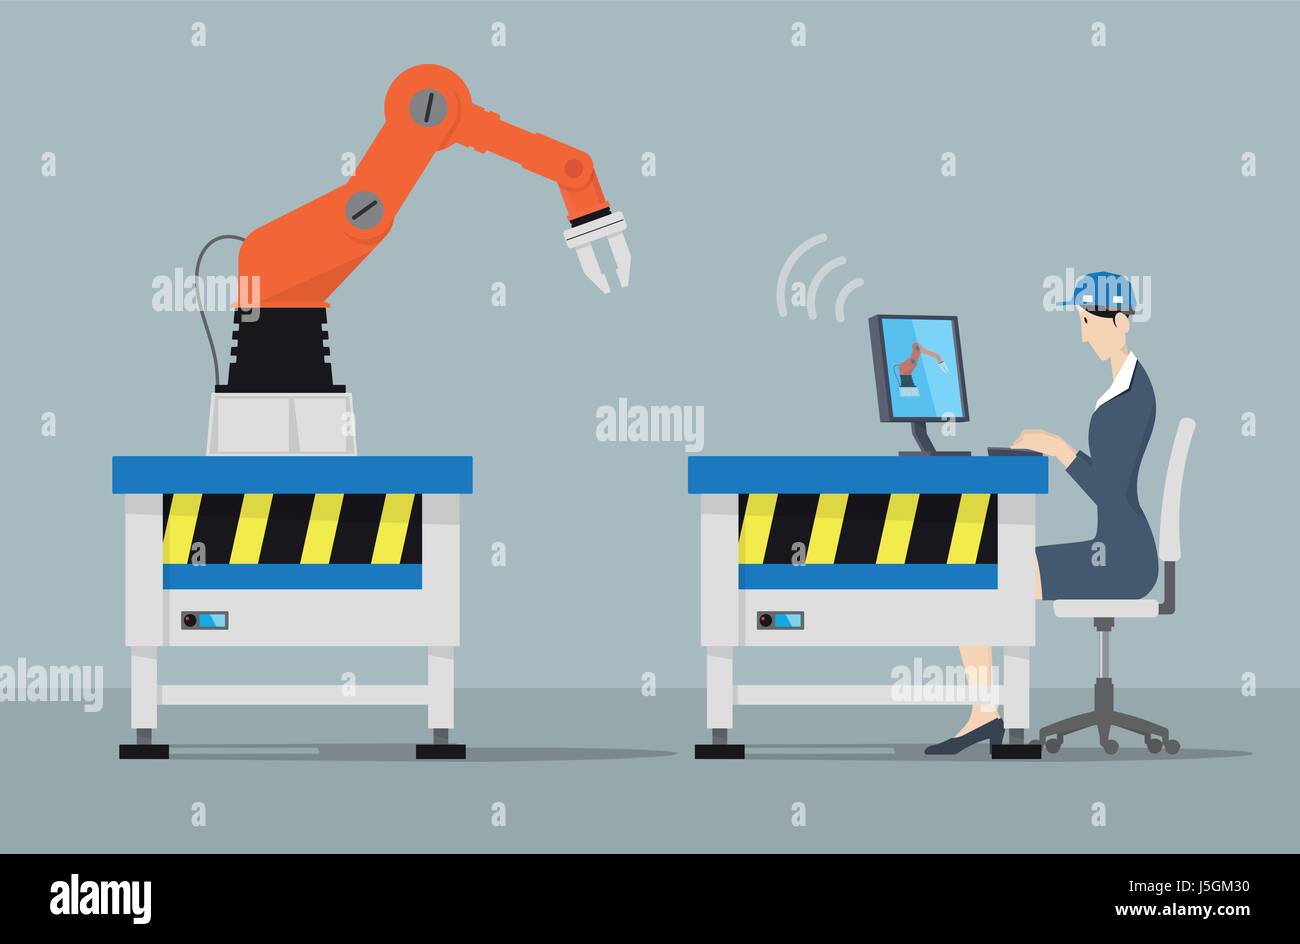 Industry 4.0 Factory Automation Concept. Robot hand controlled by engineer with desktop PC. Stock Vector